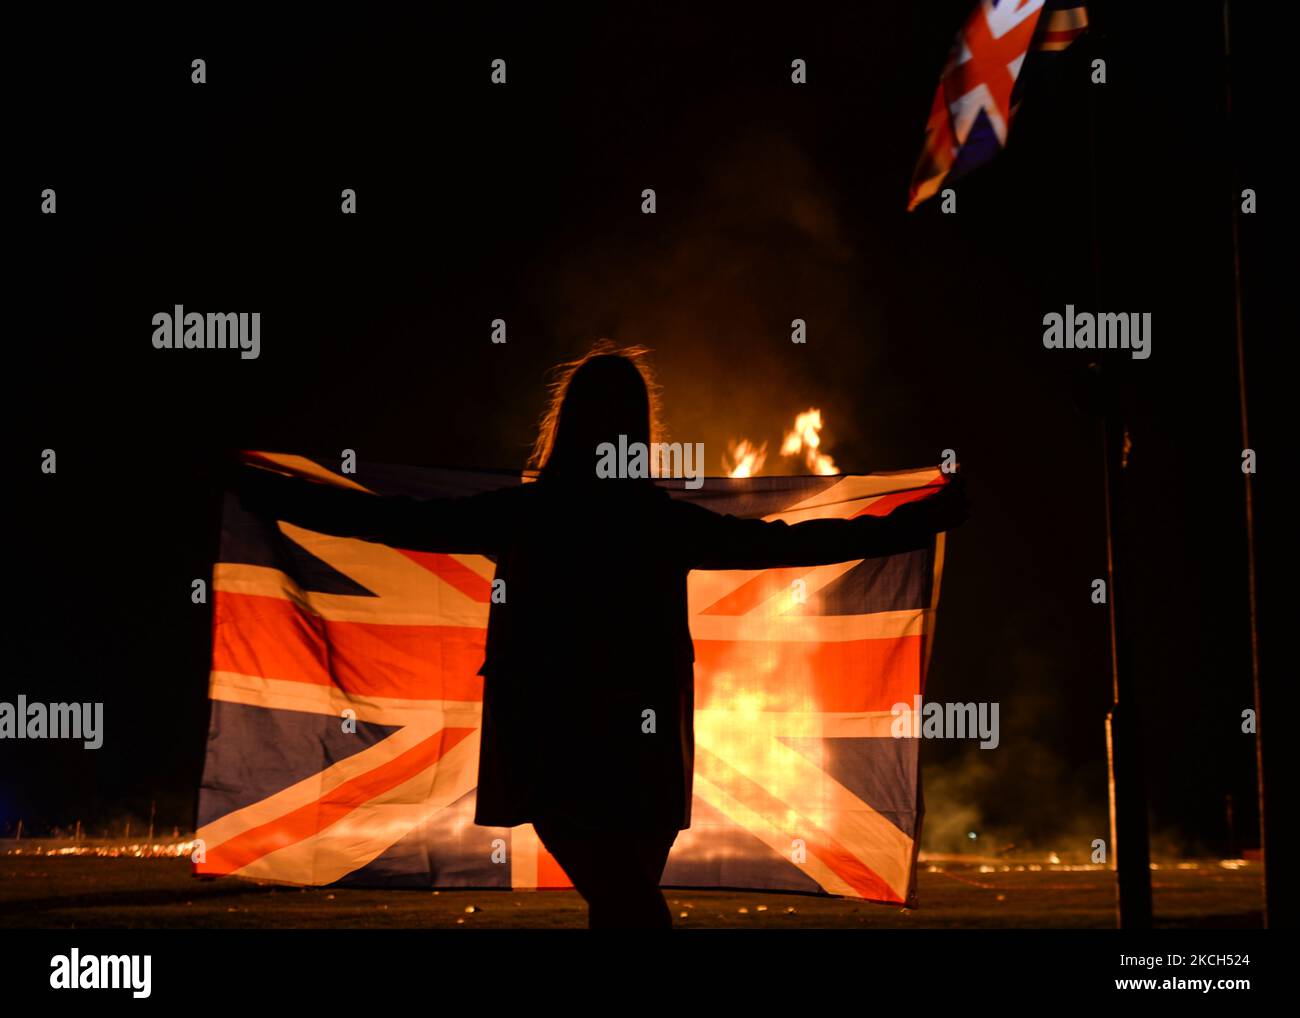 A person holding a Union Jack seen in front of a large bonfire during the Eleventh Night marking the start of the unionist Twelfth celebrations, in Craigy Hill, Larne. Tonight, large bonfires are lit in many Protestant loyalist neighbourhoods of Northern Ireland. Bonfires were originally lit to celebrate the Glorious Revolution (1688) and victory of Protestant king William of Orange over Catholic king James II at the Battle of the Boyne (1690), which began the Protestant Ascendancy in Ireland. On Monday, 12 July 2021, in Larne, County Antrim, Northern Ireland (Photo by Artur Widak/NurPhoto) Stock Photo